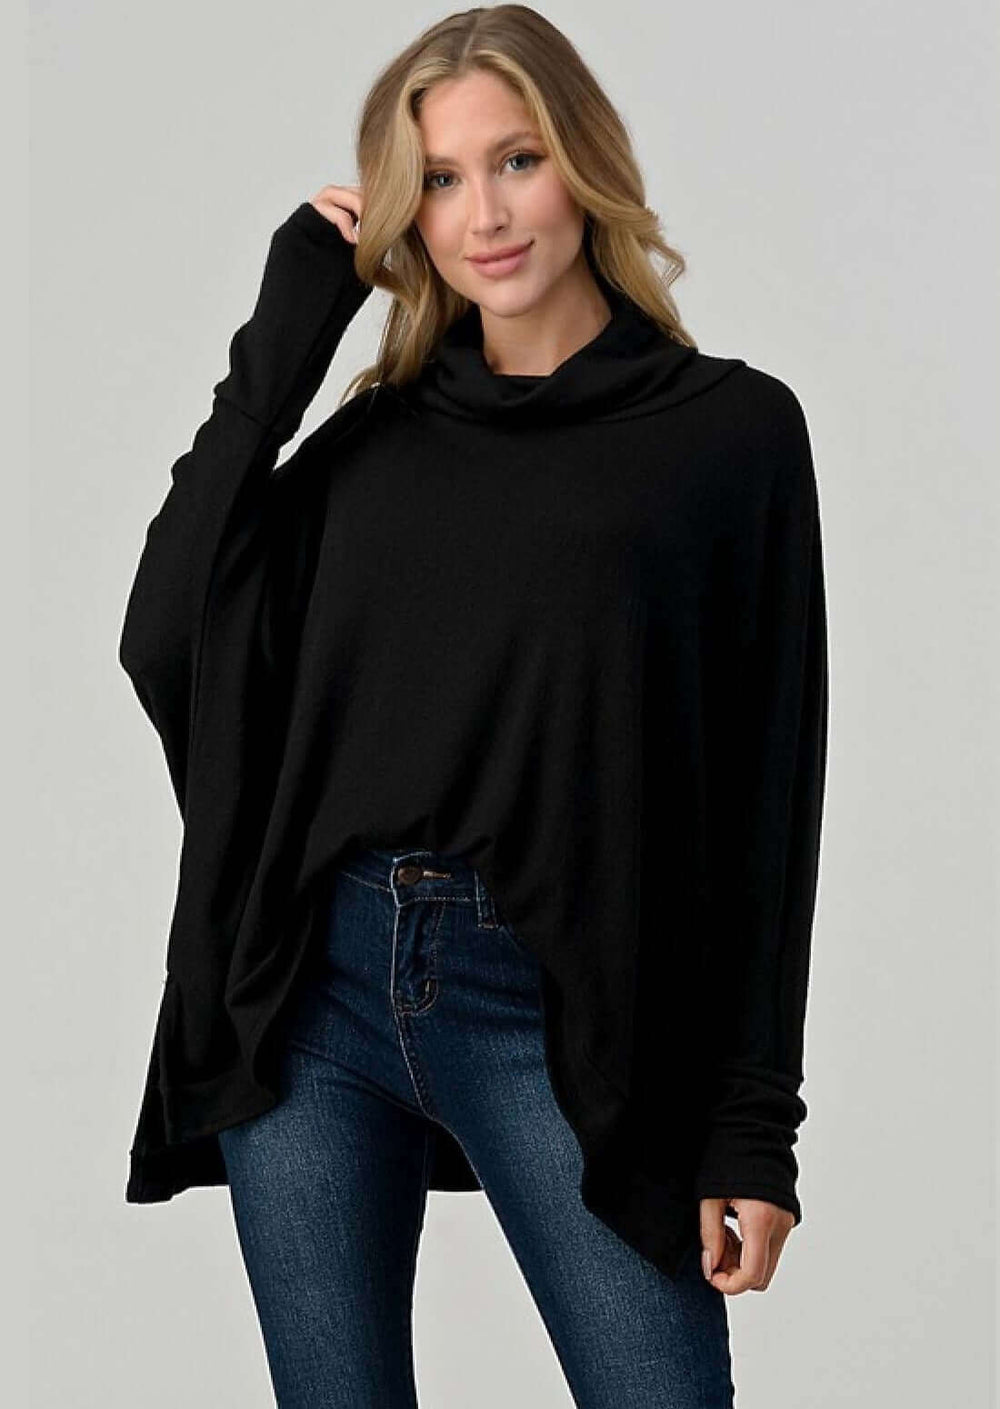 Made in USA Ladies Cowl Neck Long Sleeves Cashmere Feel Tunic Sweater in Black  | Classy Cozy Cool Women's Made in America Clothing Boutique